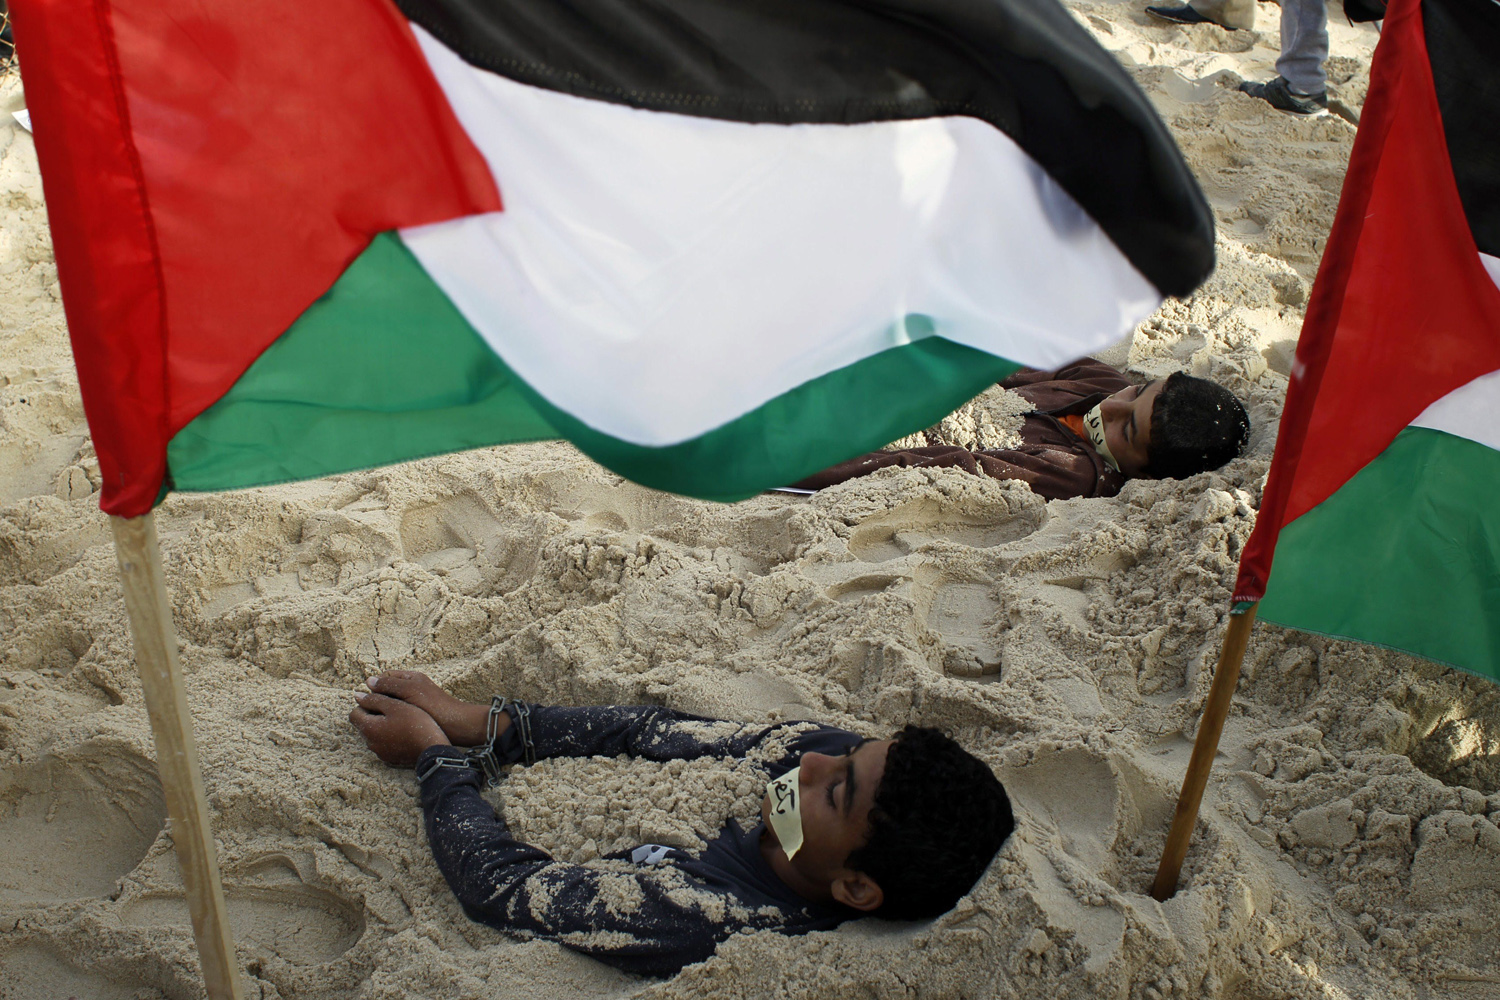 Mar. 7, 2014. Palestinian children lie in the sand with their hands clasped next to their national flags during a rally against the siege on the impoverished Hamas-run Gaza Strip in the coastal town of Rafah.